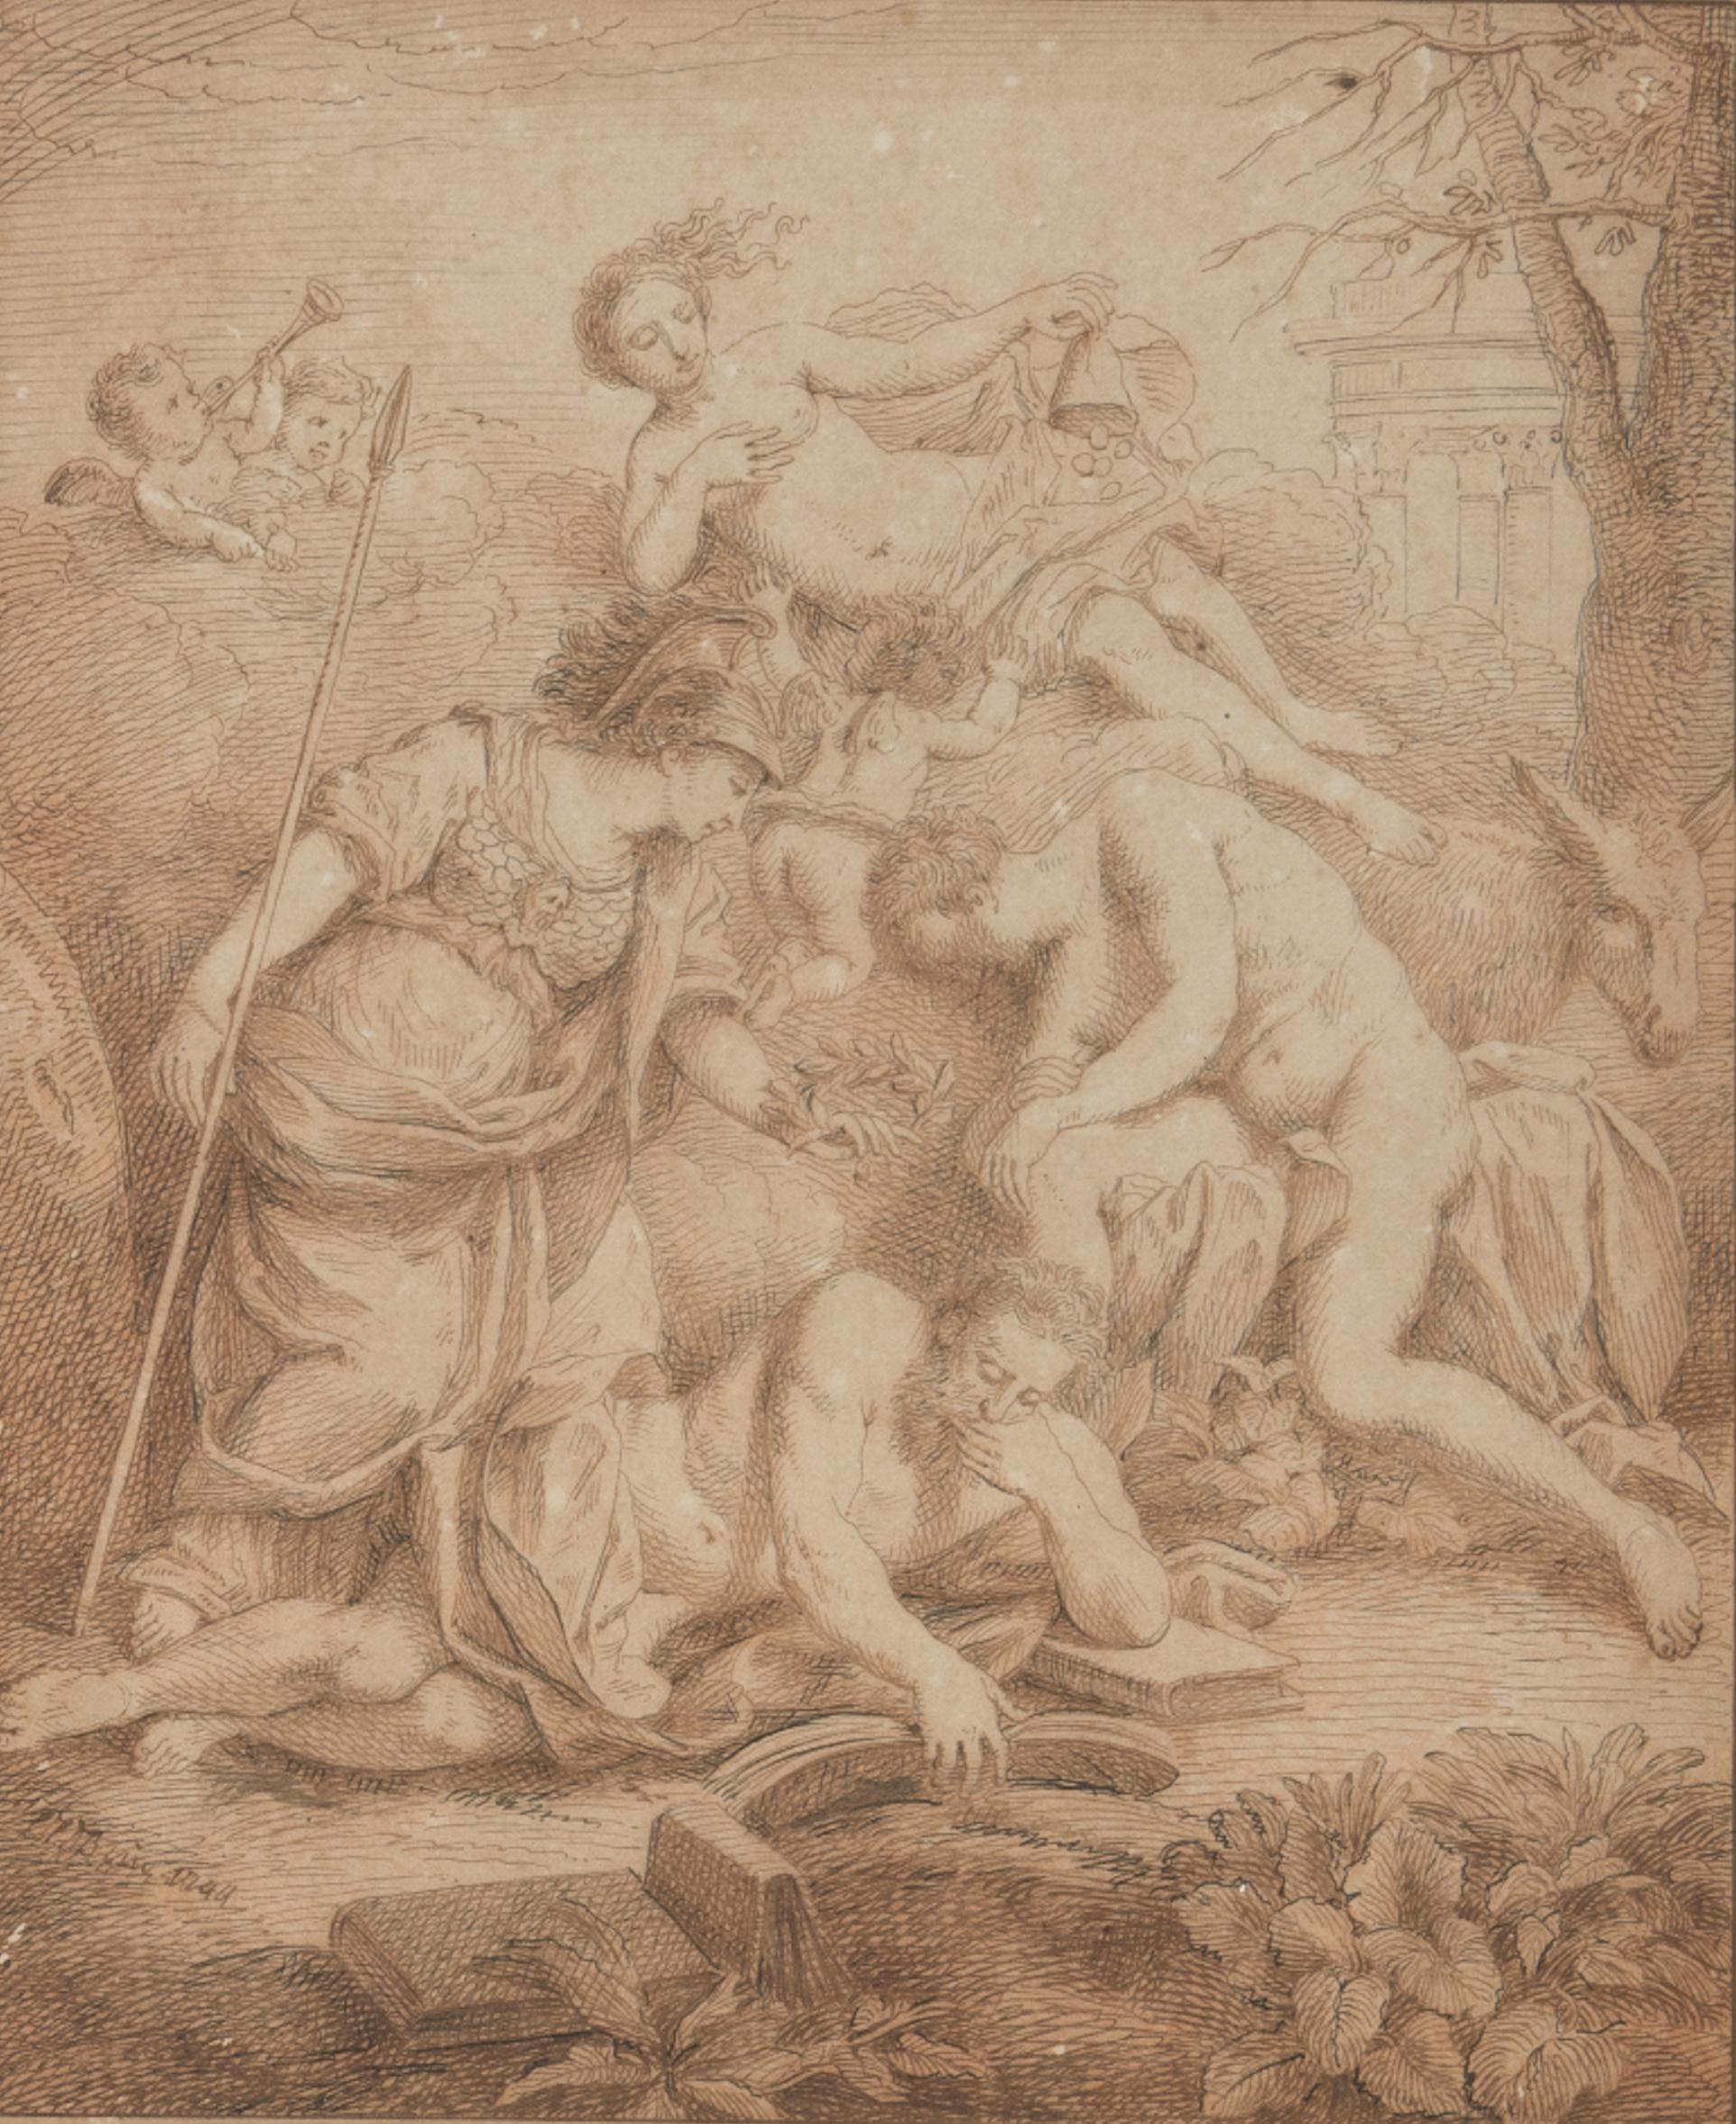 Allegorical Scene - Sepia Drawing Attribute to L.F. Dubourg -Early 1700